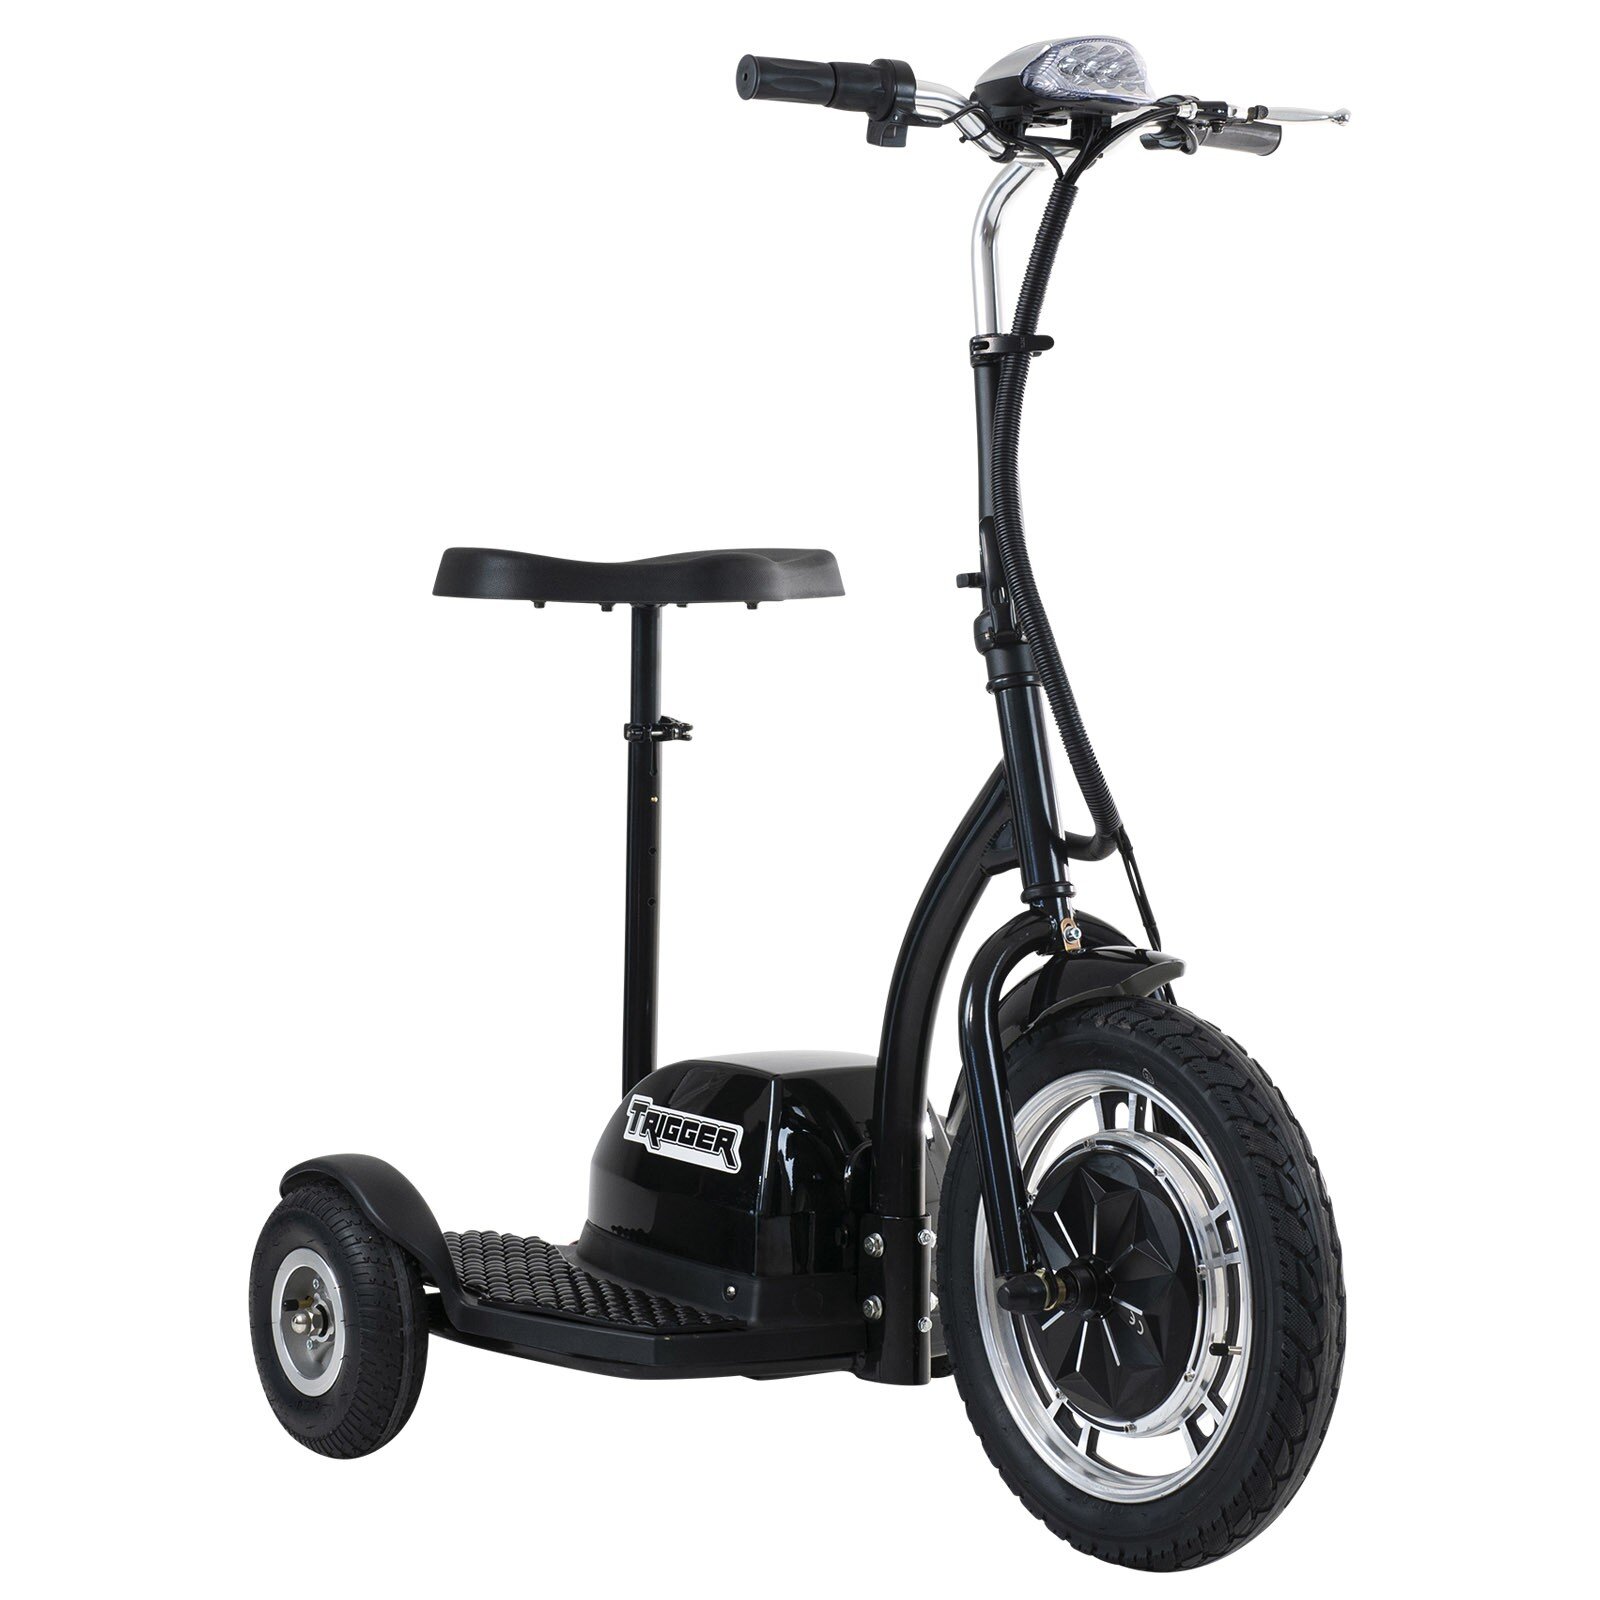 Trehjulet scooter Trigger, 500W